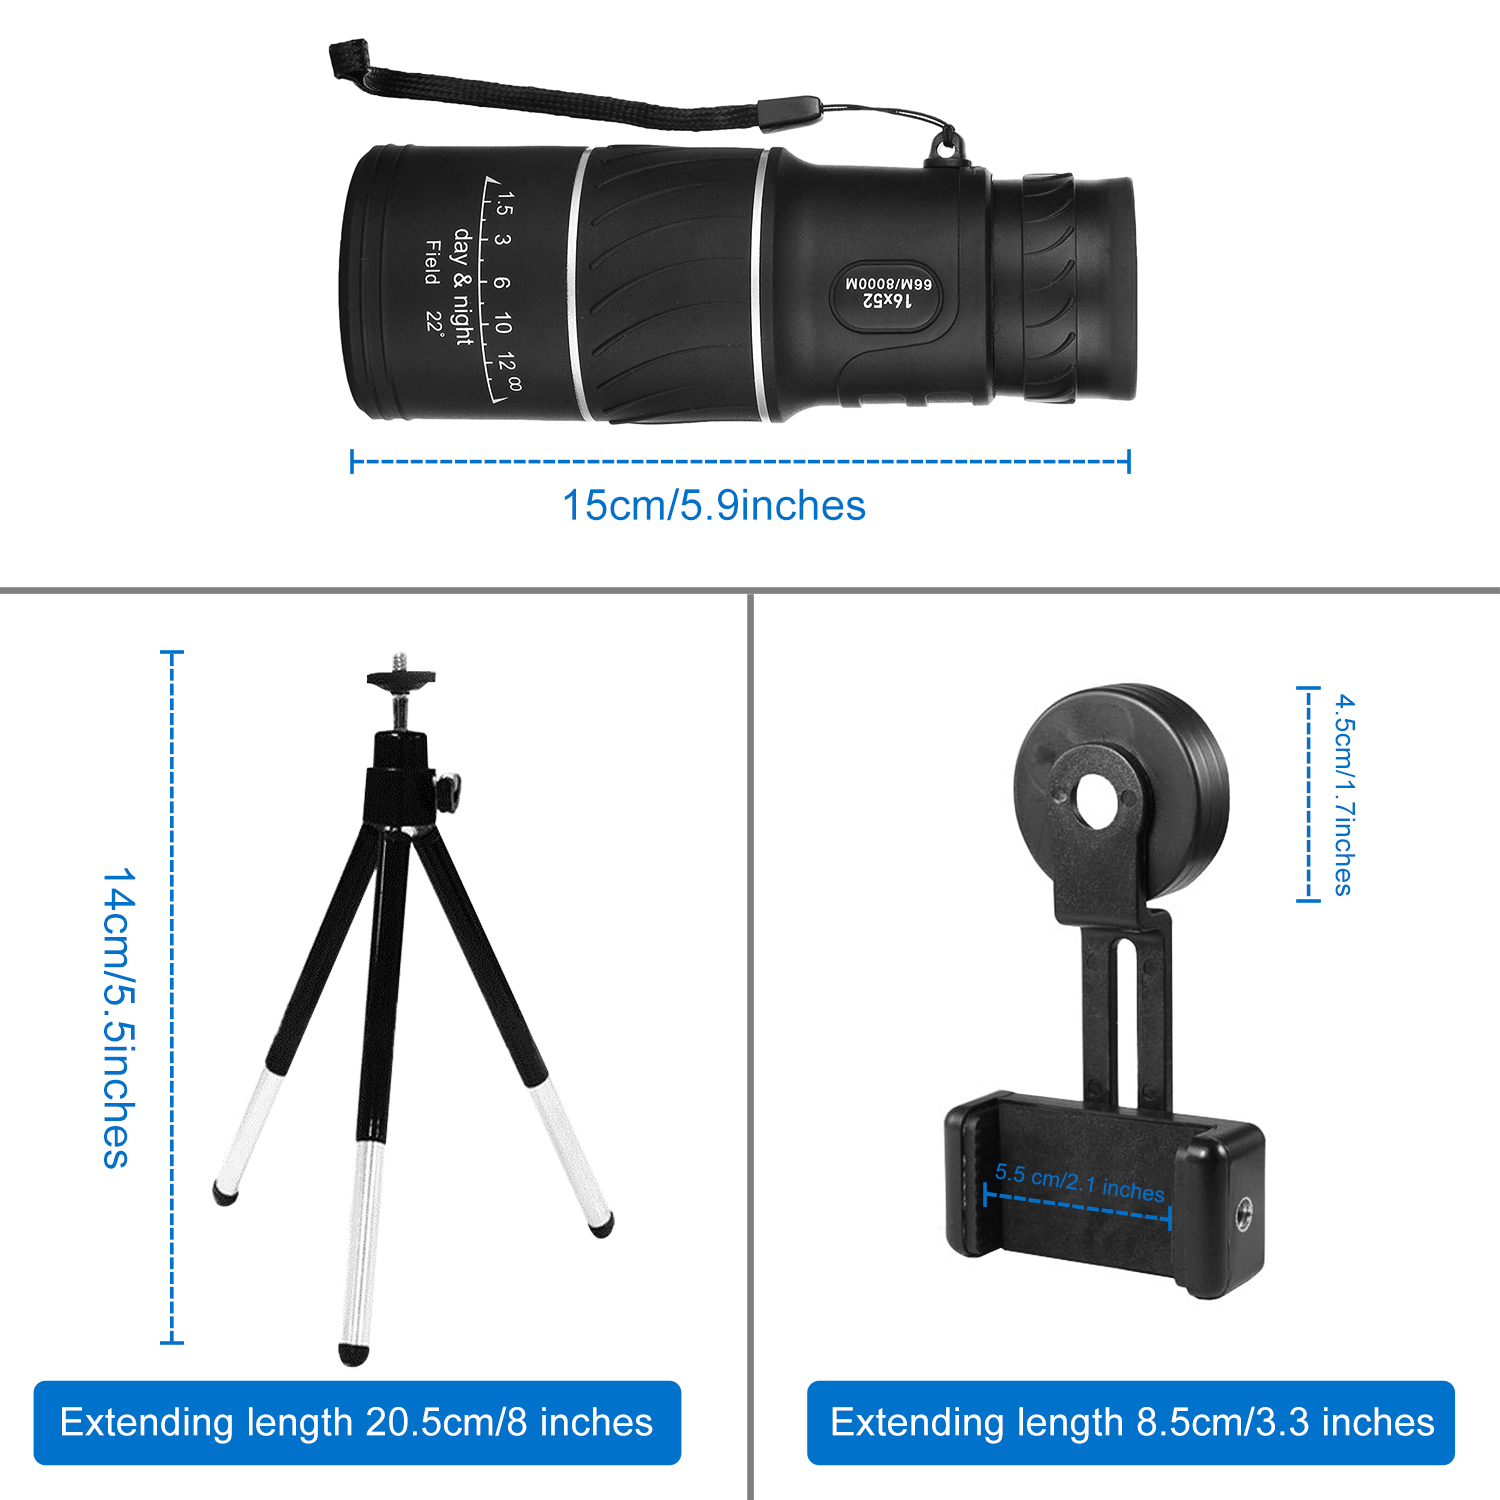 AOBETAK 16x52 Monocular Telescope, High Power Spotting Scopes Equipped With Phone Adaptor and Tripod, Low Light Night Vision Binoculars or Adults Kids Bird Watching Traveling, Outdoors 98m/ 8000m